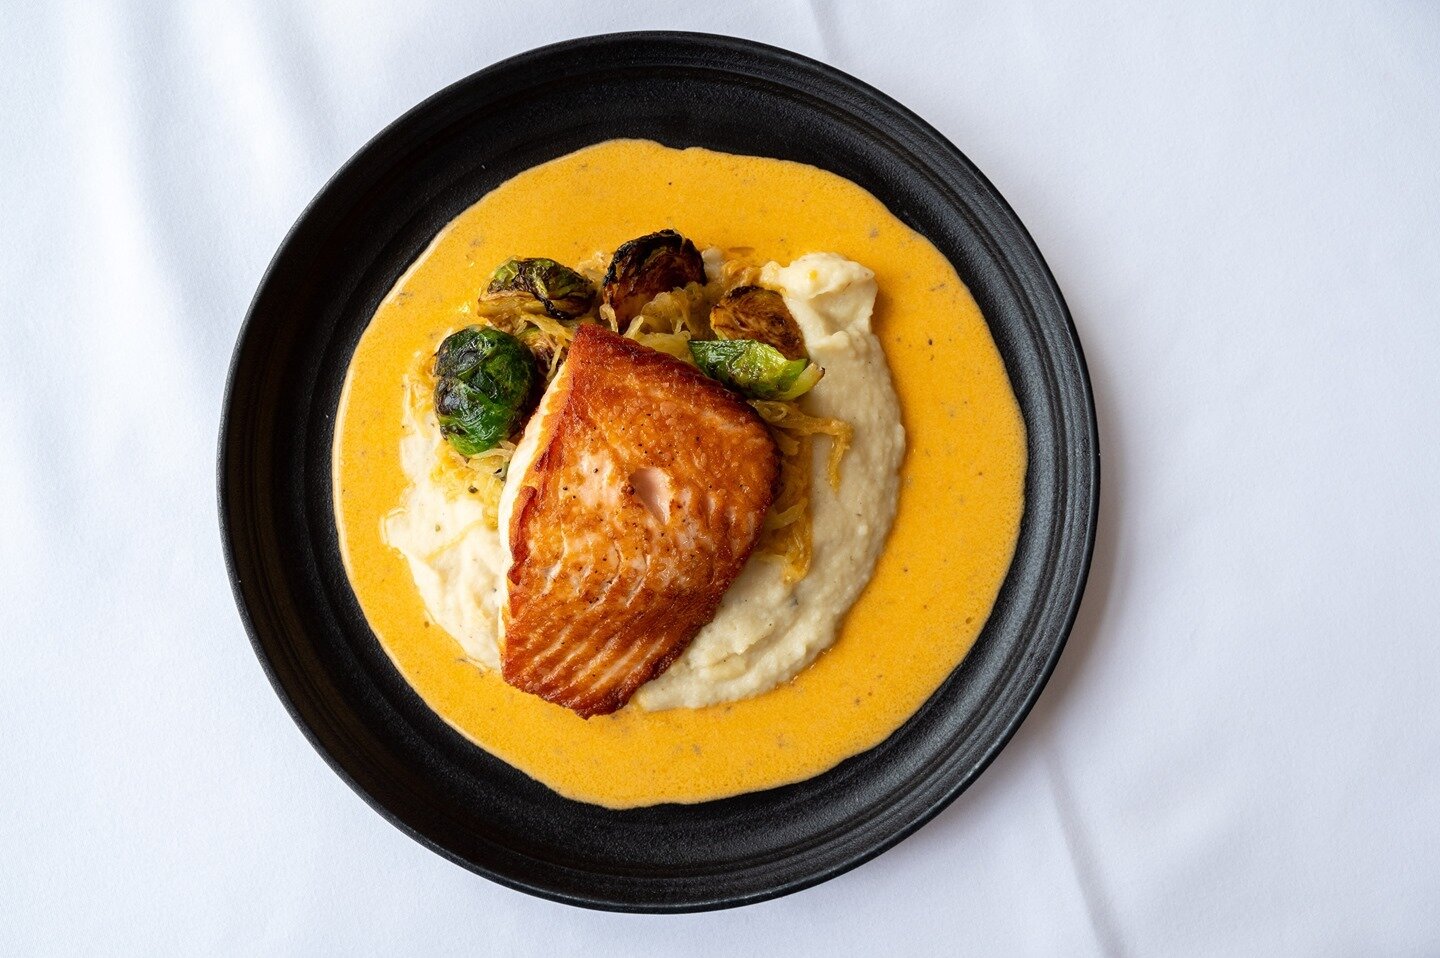 Seared Salmon!⁠
⁠
Gulf of Maine Salmon with Brussels sprouts, mushrooms, cornmeal gnocchi, truffle coulis!⁠
⁠
#salmon #seafood #seafoodporn #seafoodlover #seafoodlove #seafoodlovers #seafoodtime #freshseafood #seafoodresturant #seafoodie #seafoods #c